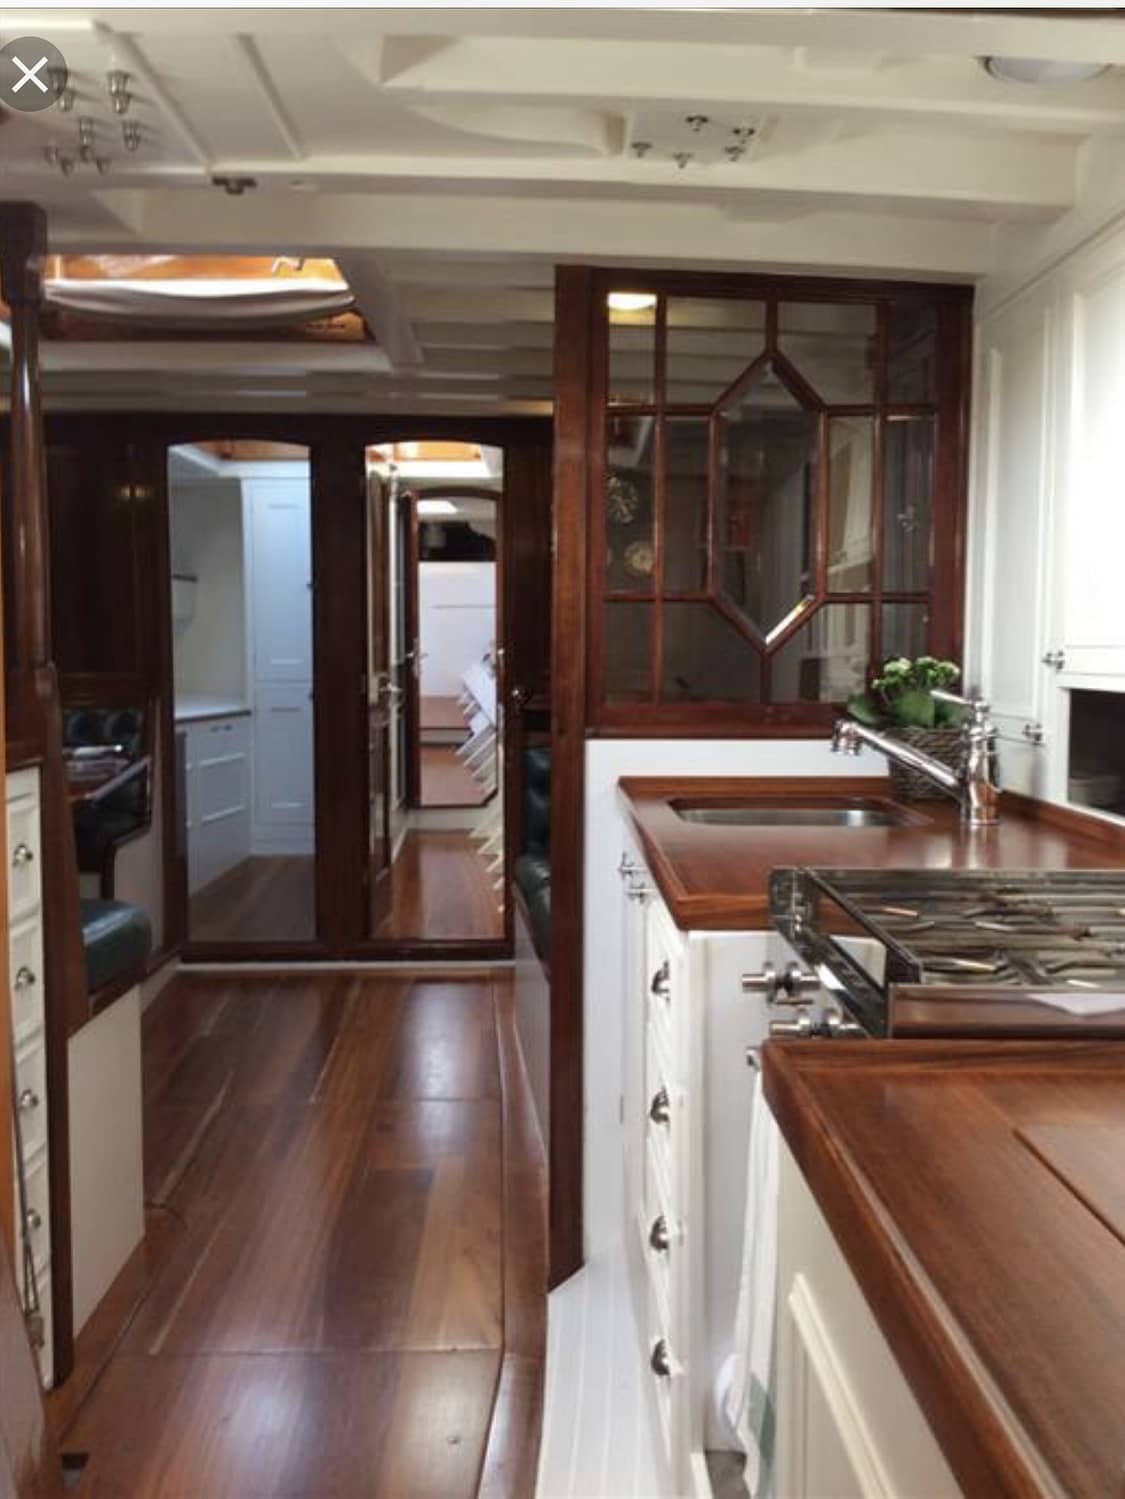 View of the kitchen aboard the Kelpie Yacht.